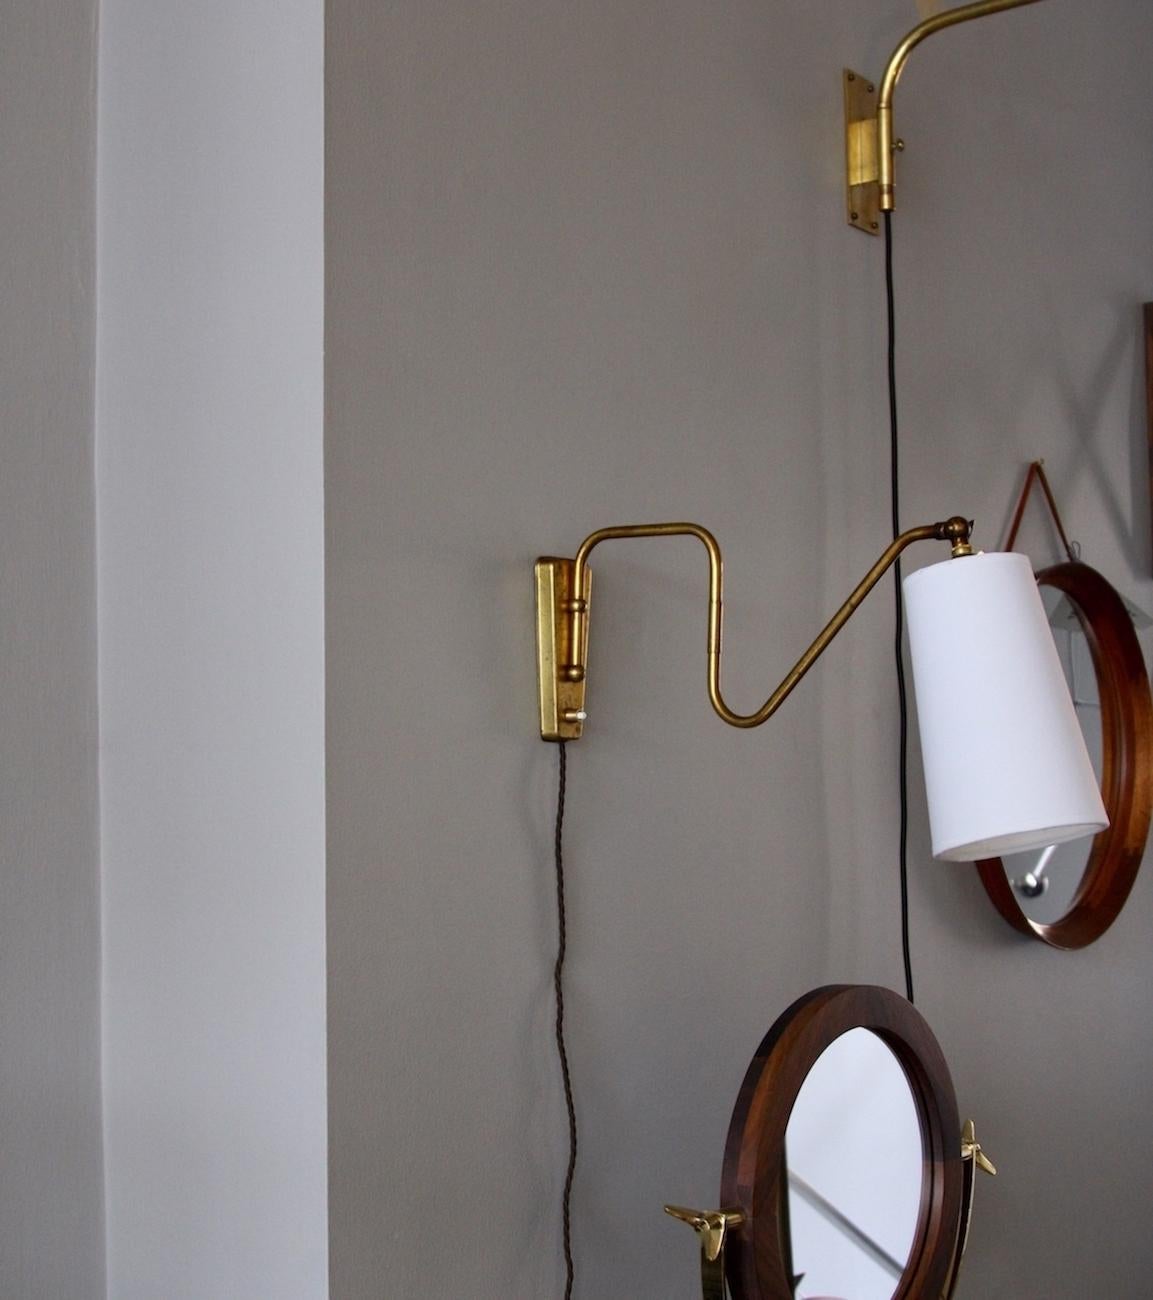 A petite wall light in polished brass, designed and made in Denmark circa 1950.
The arm of the light can move around a 180 degree angle. The pivot point is on the downwards rod parallel to the wall bracket. Loosening the wing-nut behind the bulb